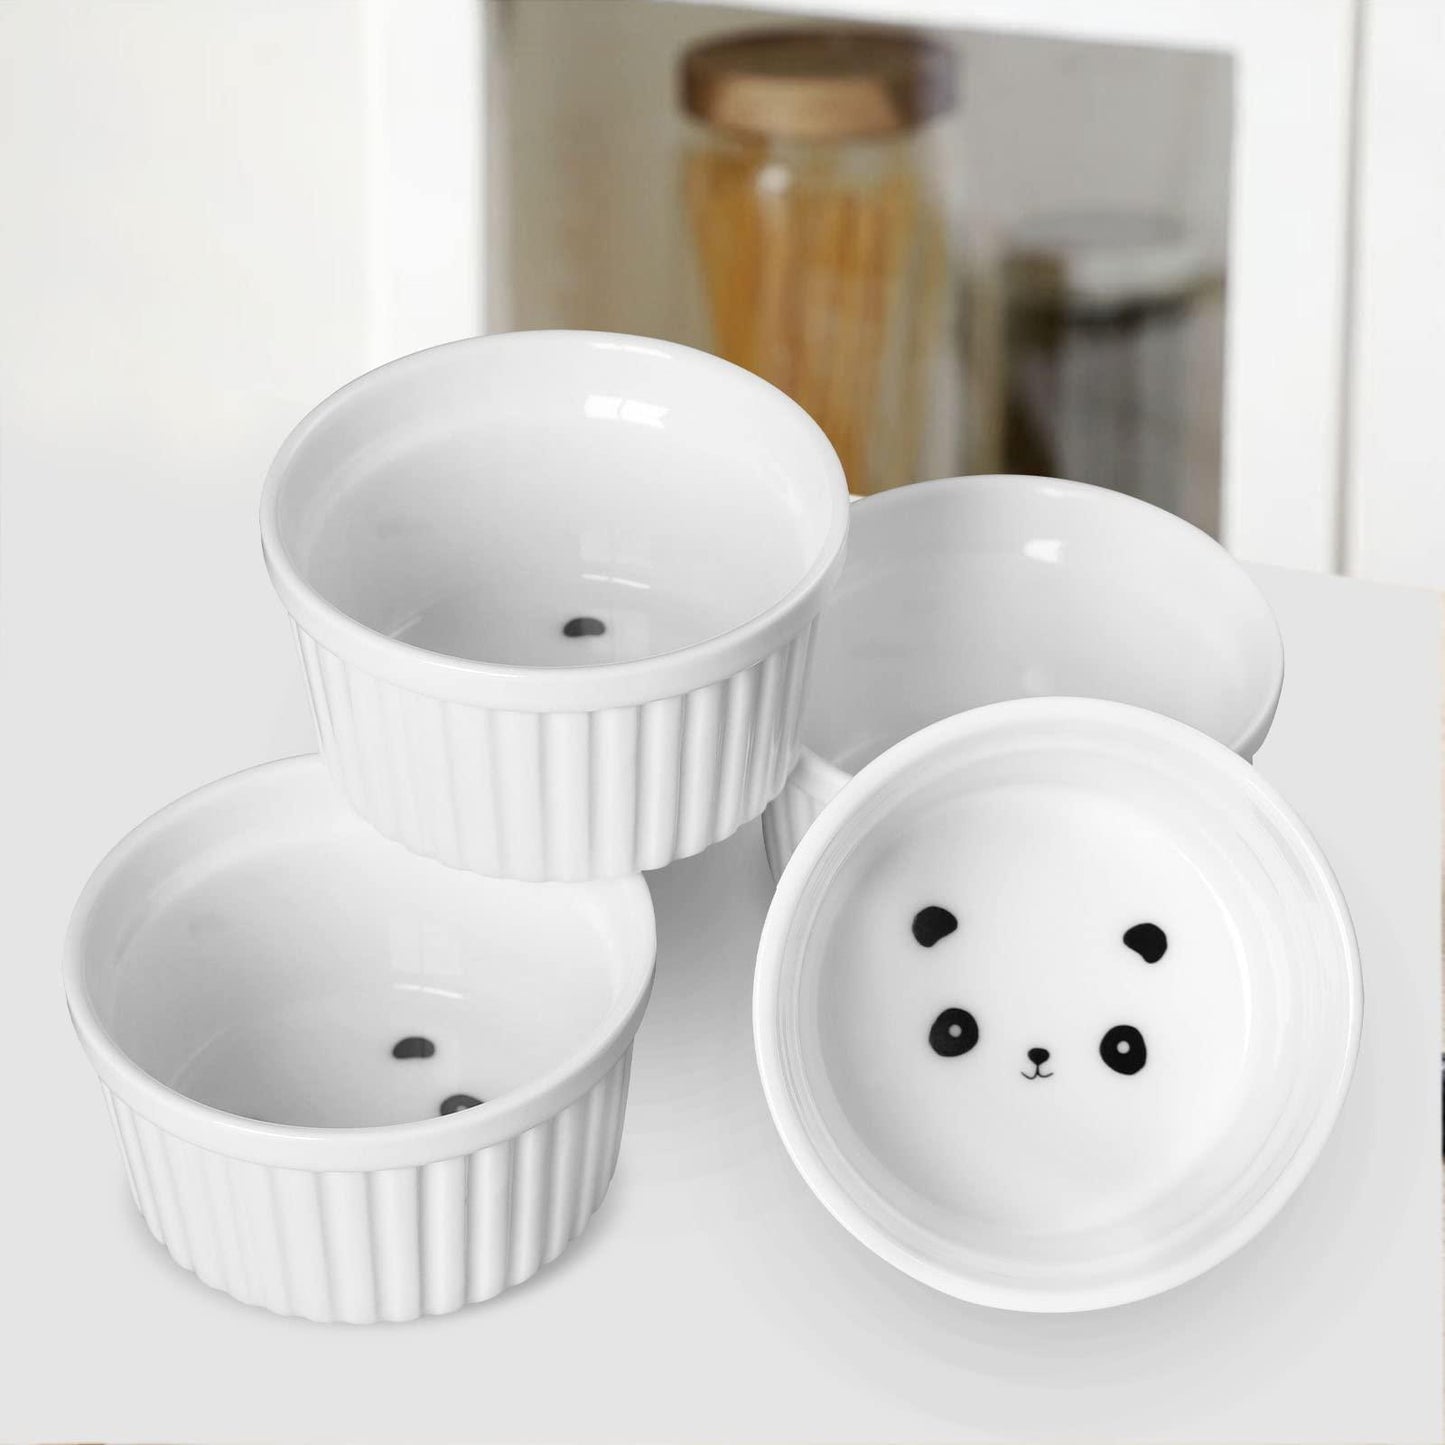 Cinf Panda 4 oz Set of 4 Ramekins Pudding Baking Cup Souffle Cups Dishes Bowl - CookCave